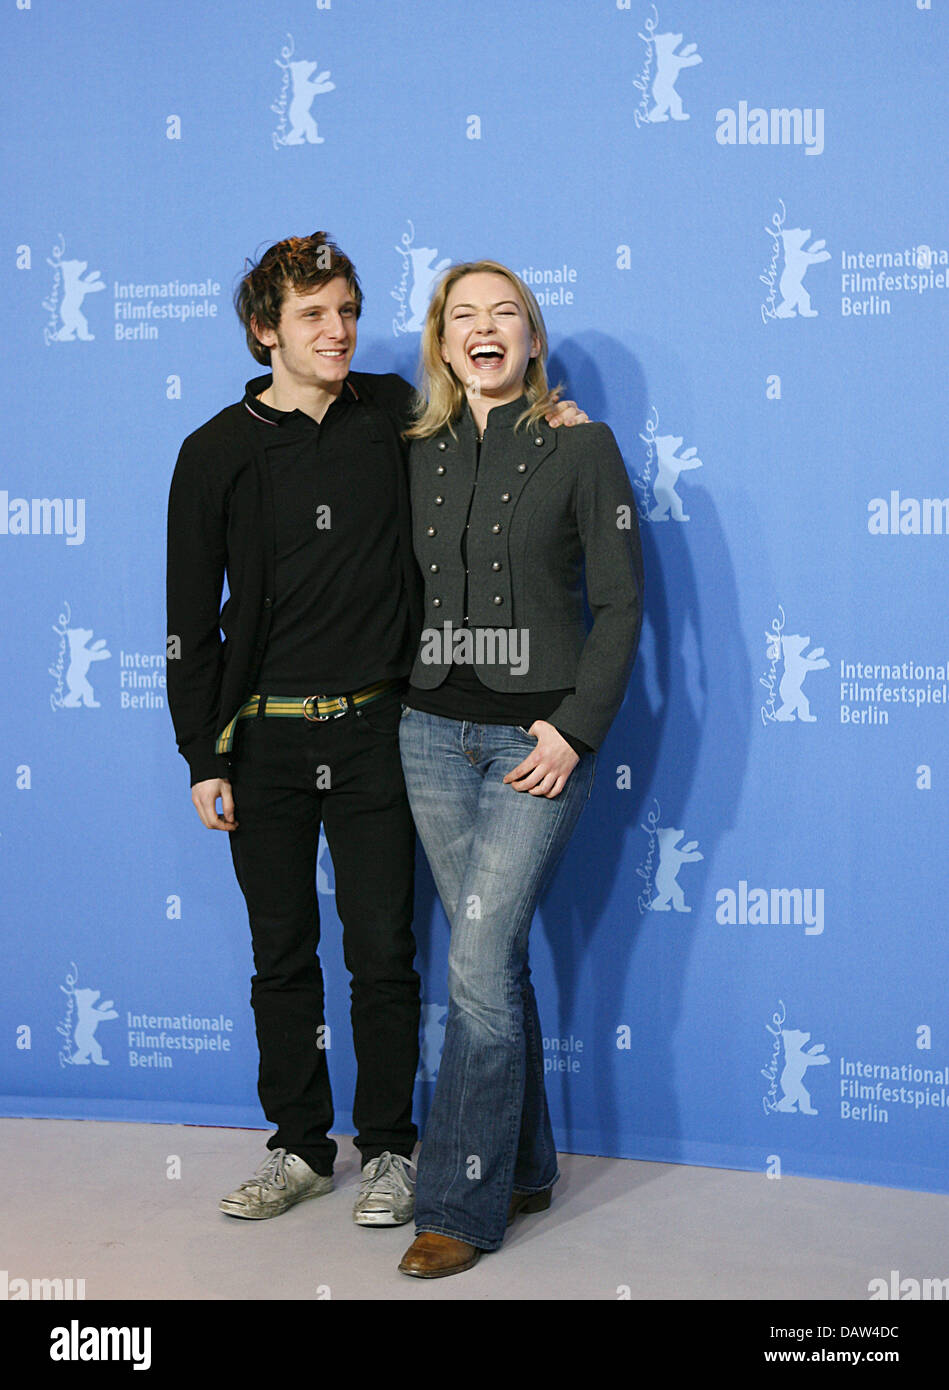 British actress Sophia Myles (R) and actor Jamie Bell (L) smile at a photo call for their film  'Hallam Foe' at the 57th Berlinale International Film Festival in Berlin, Germany, Friday, 16 February 2007. Photo: Wolfgang Kumm Stock Photo